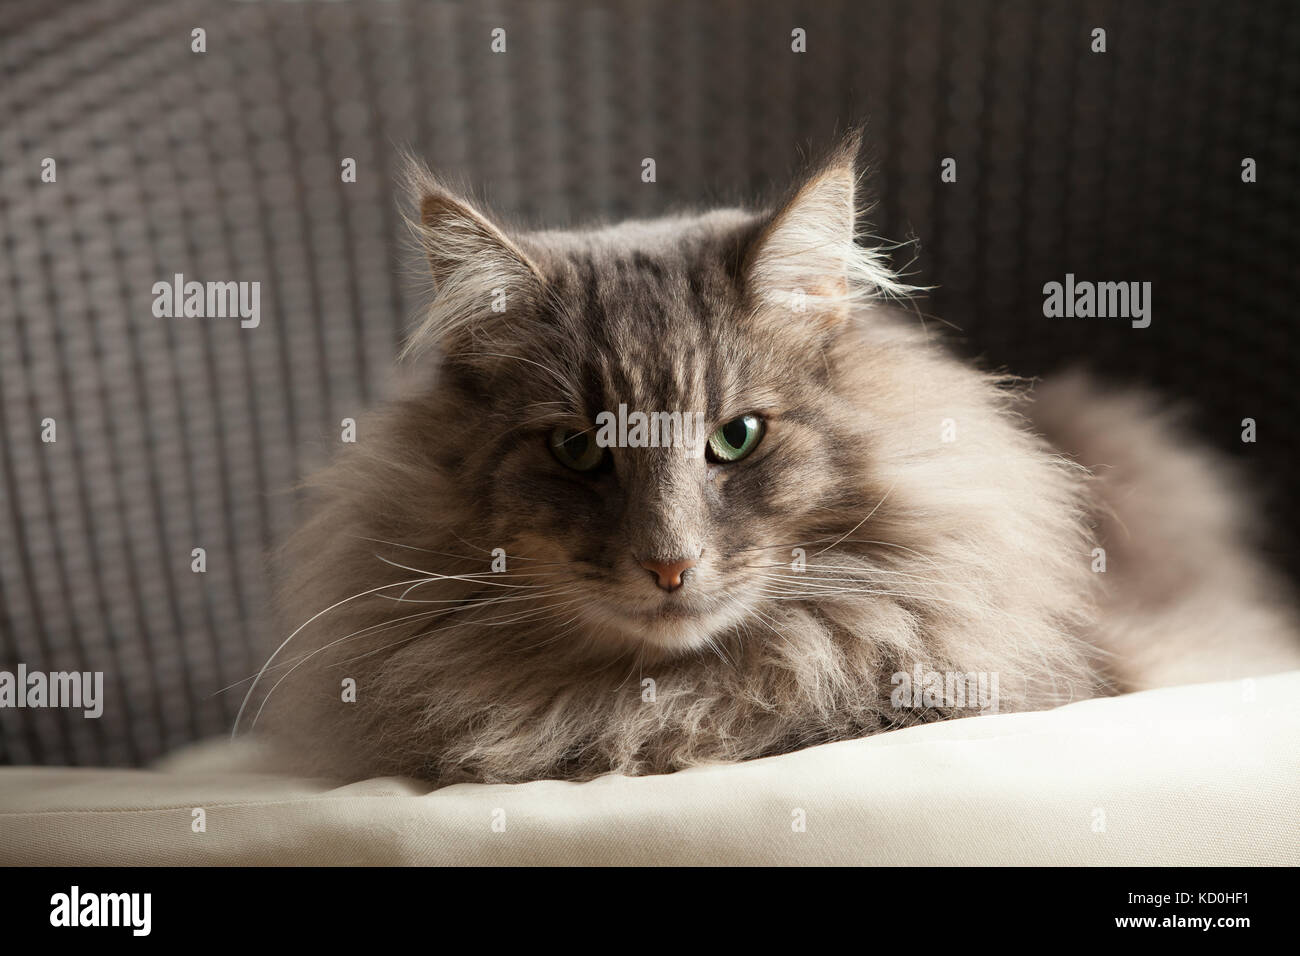 Animal portrait of Norwegian forest cat looking at camera Stock Photo